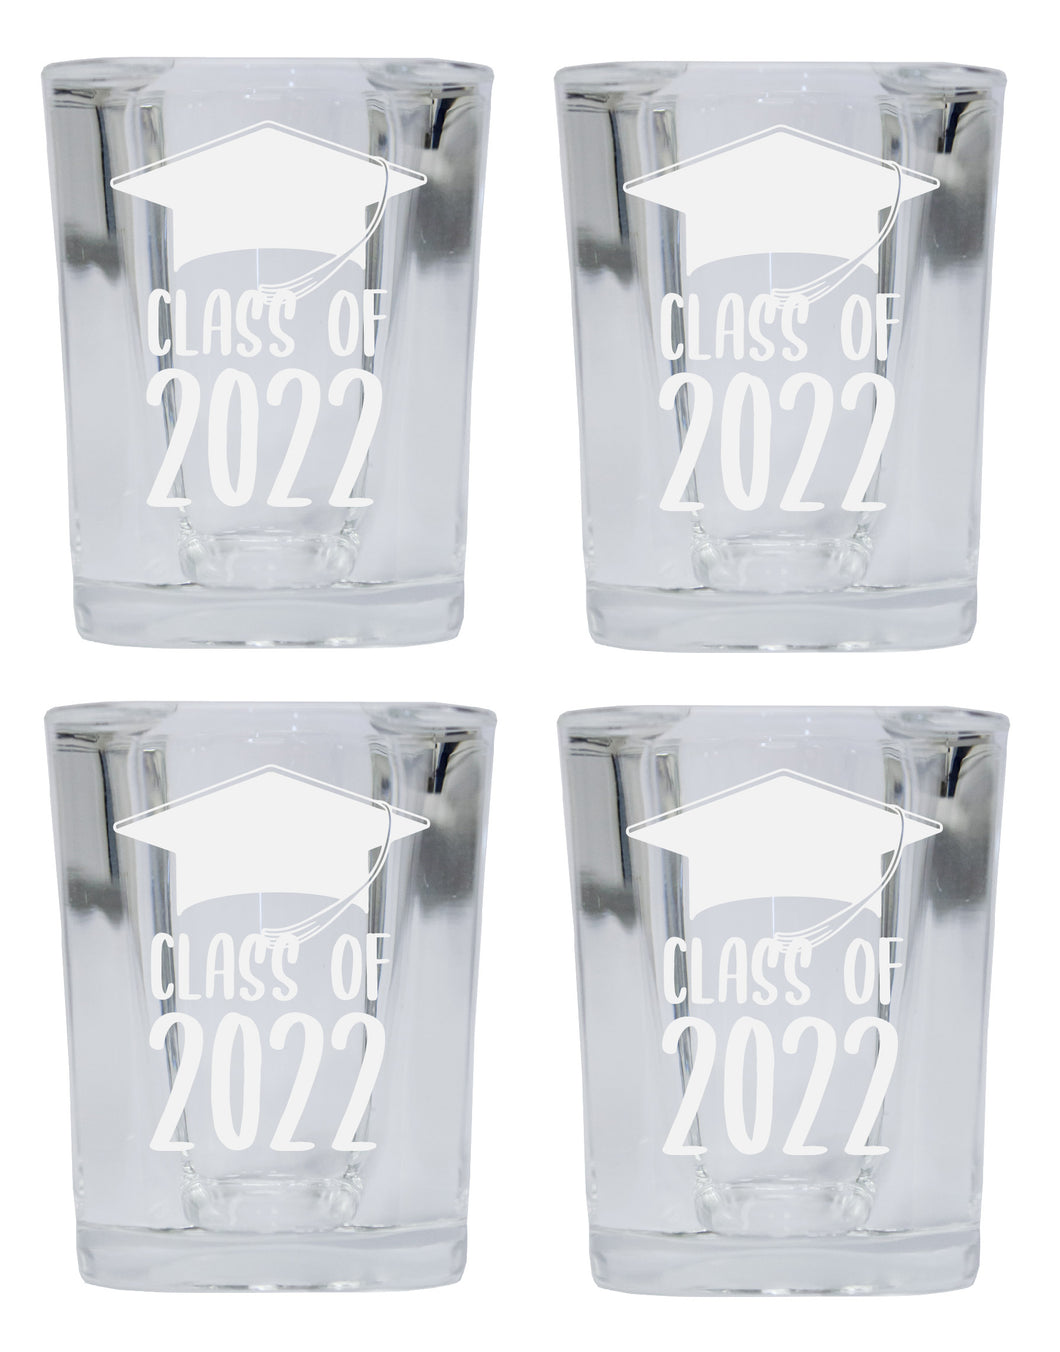 Class of 2022 Grad Graduation Gift 2 Ounce etched Square Shot Glass